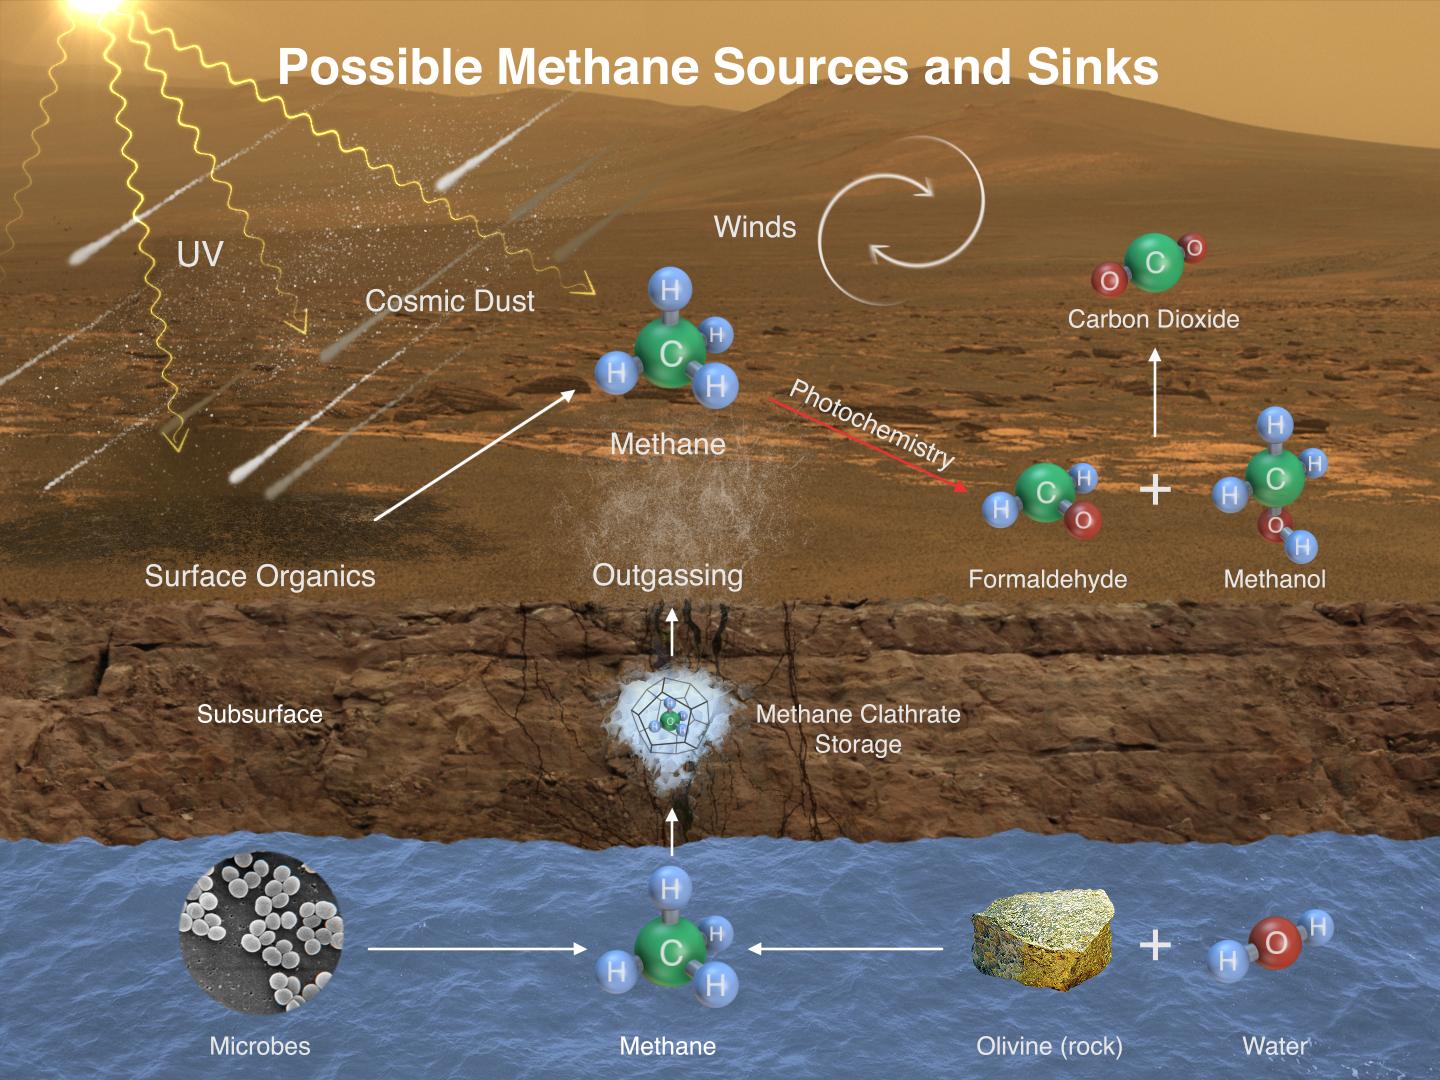 There are several possible ways that methane can be created, stored, and released on Mars, including both biological and non-biological pathways.